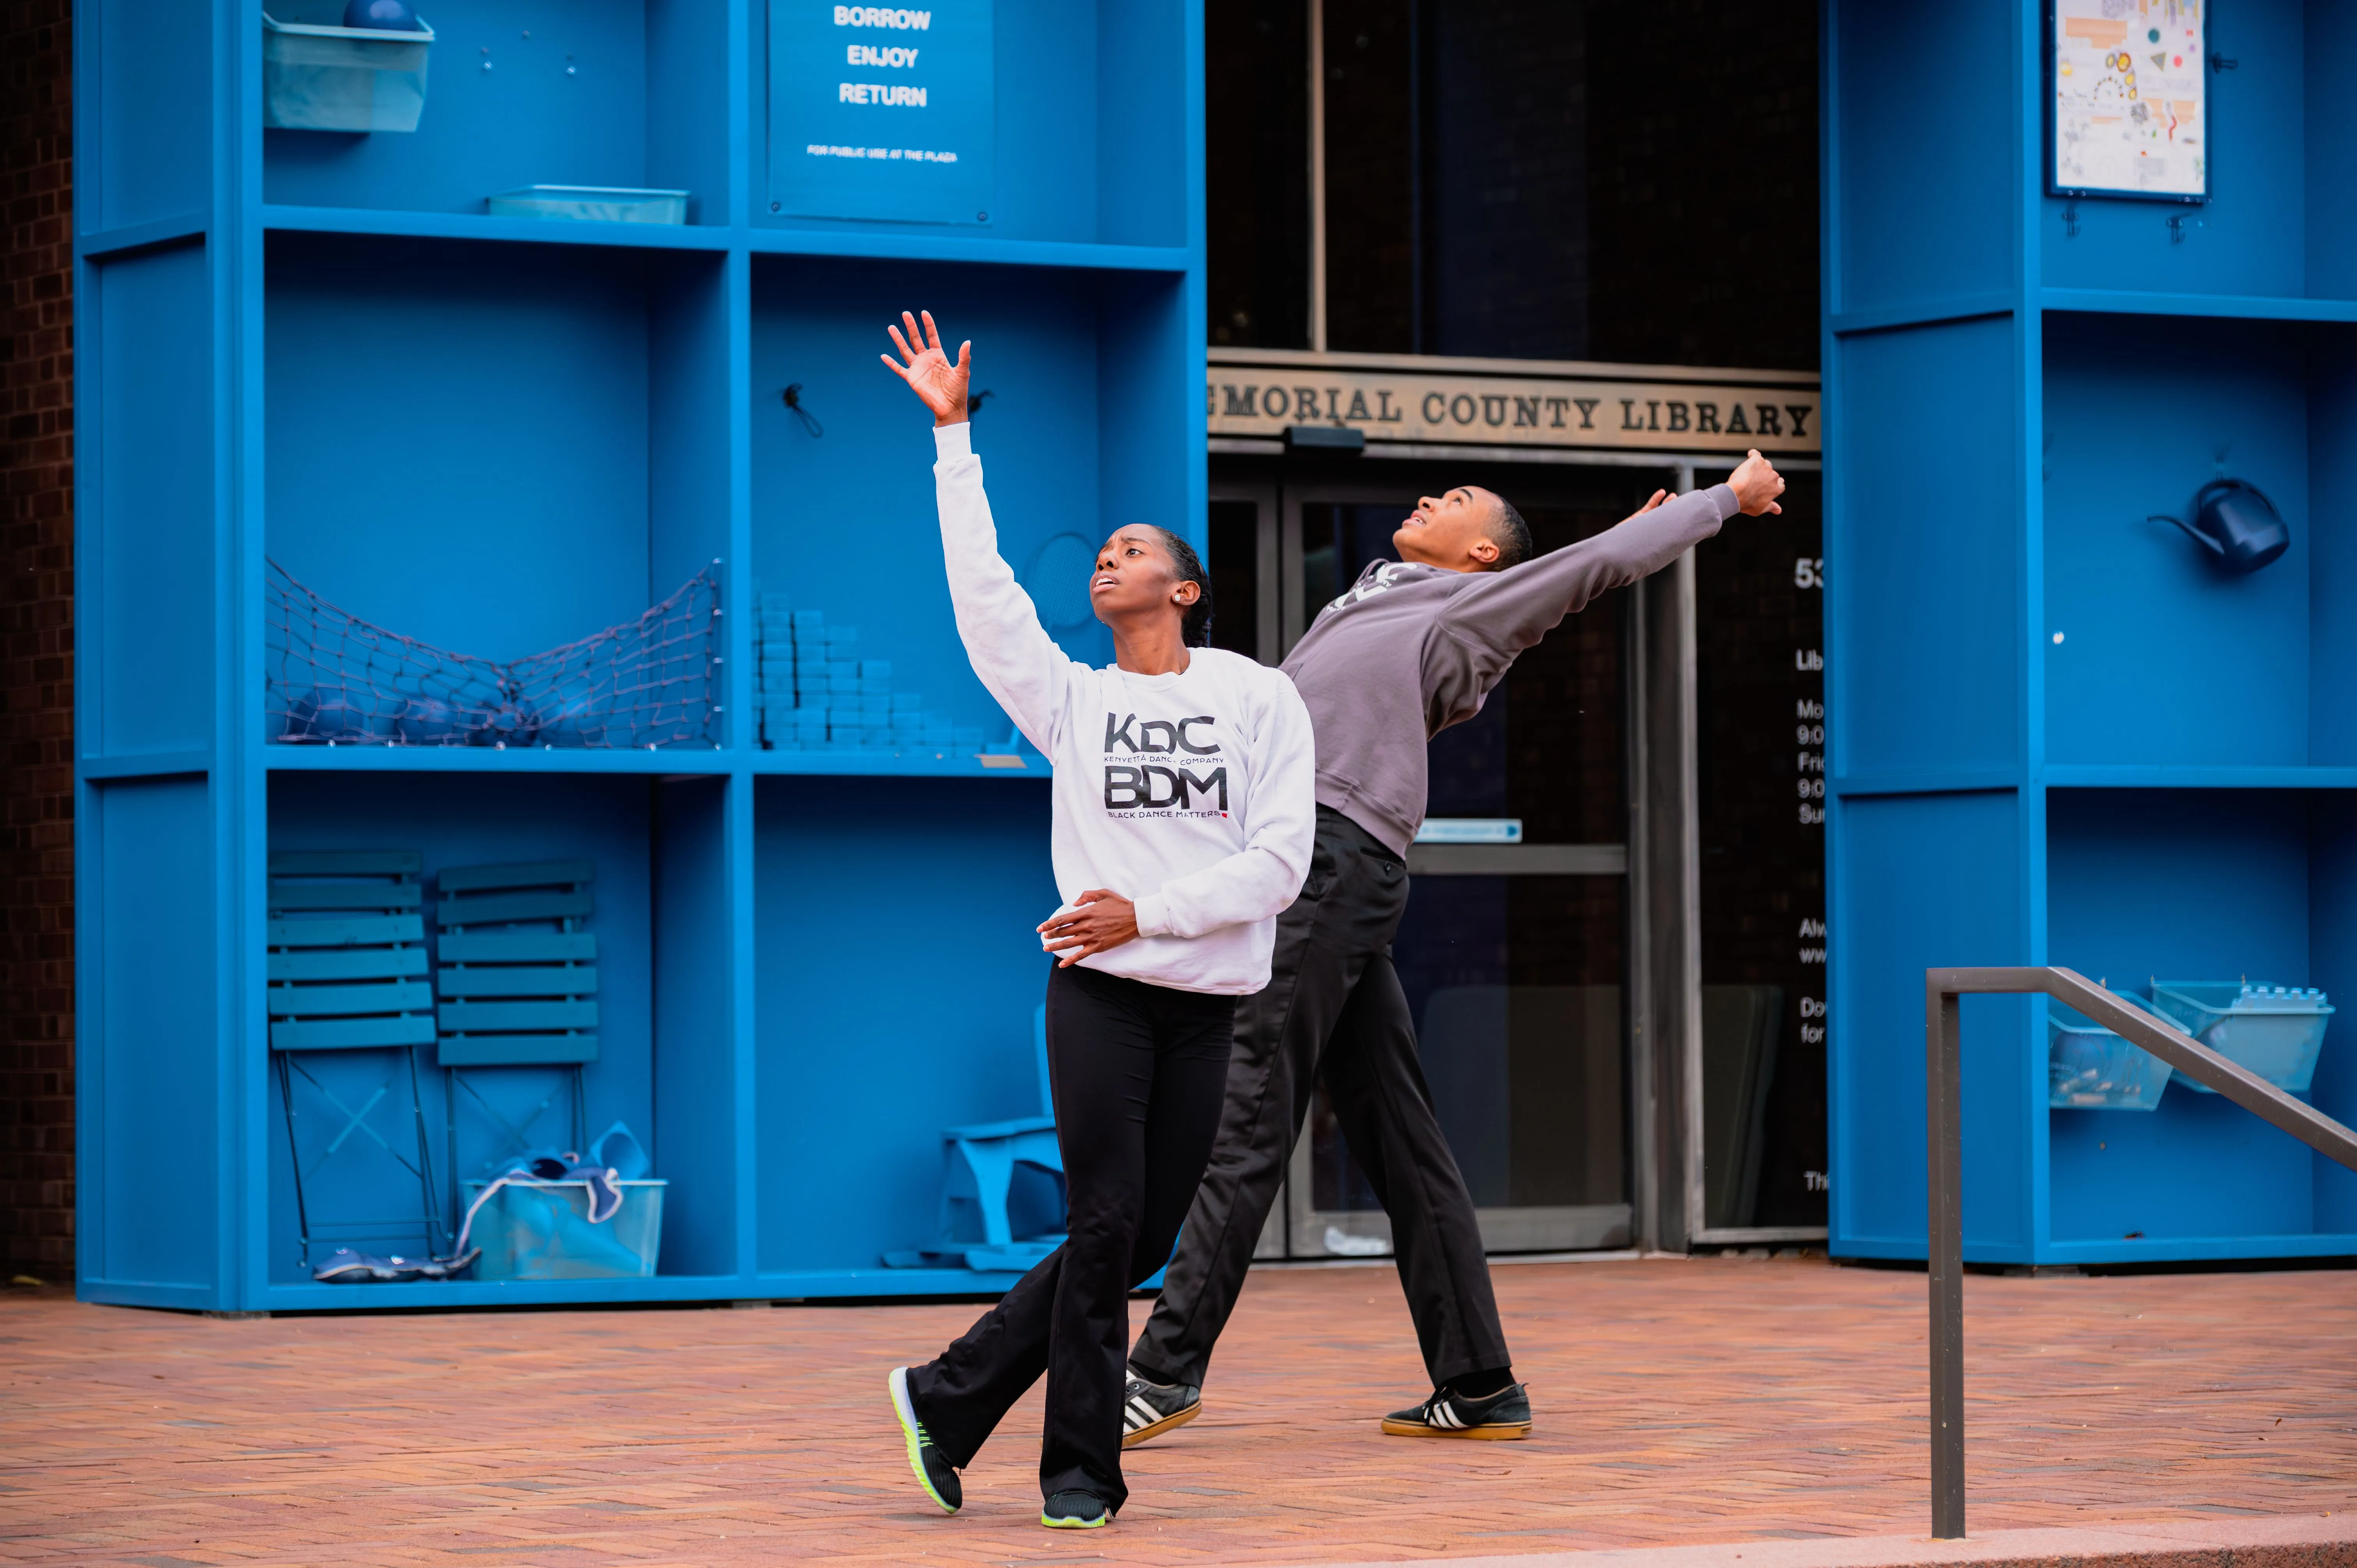 Two individuals in casual attire joyfully dancing outside a blue building with "Public Library" signage.